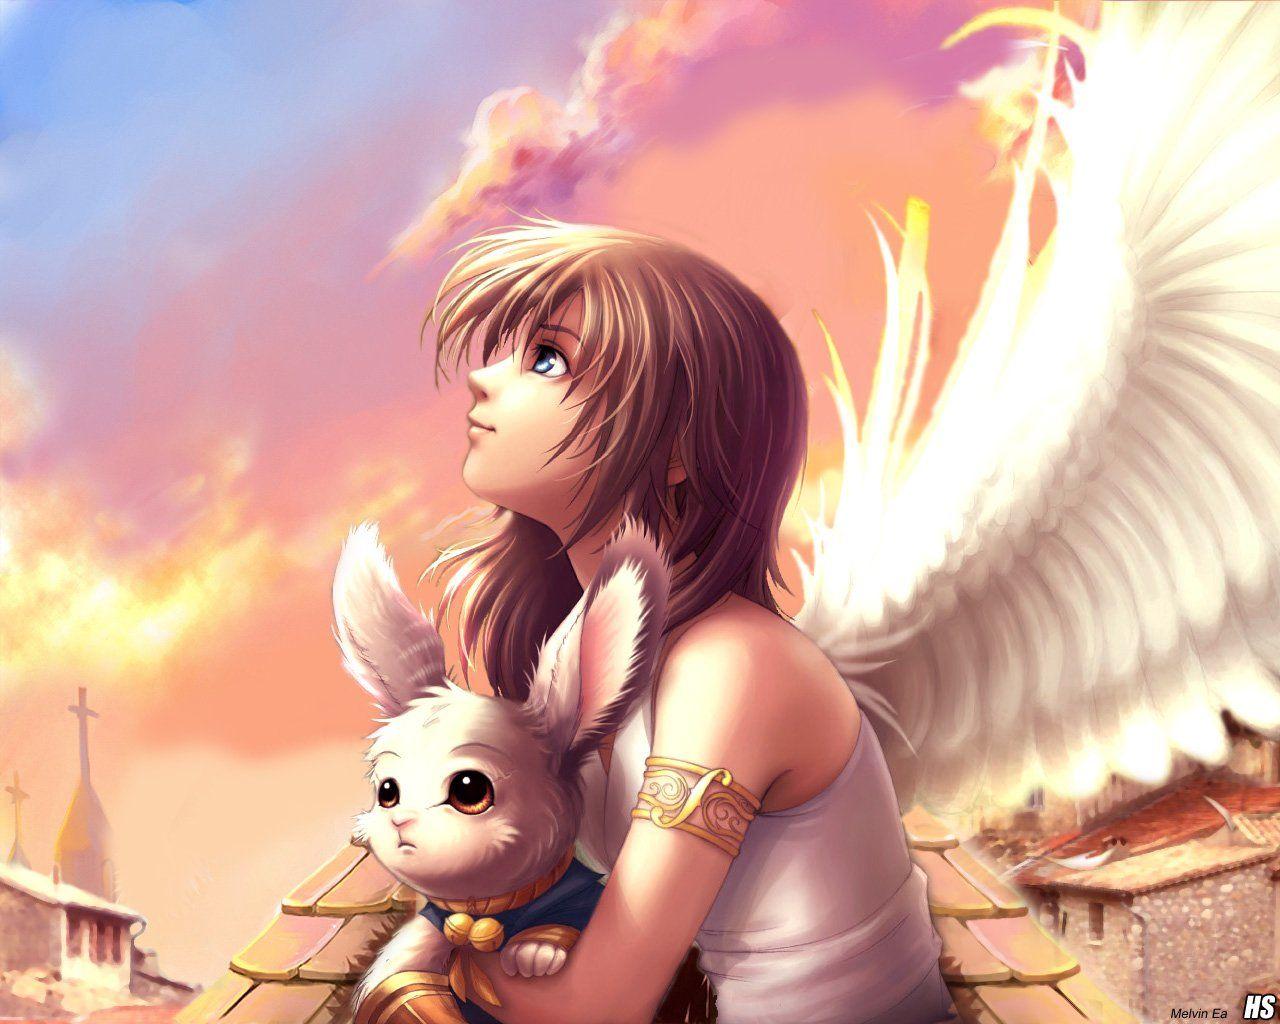 Anime Angel Girl Wallpapers Top Free Anime Angel Girl Backgrounds Wallpaperaccess